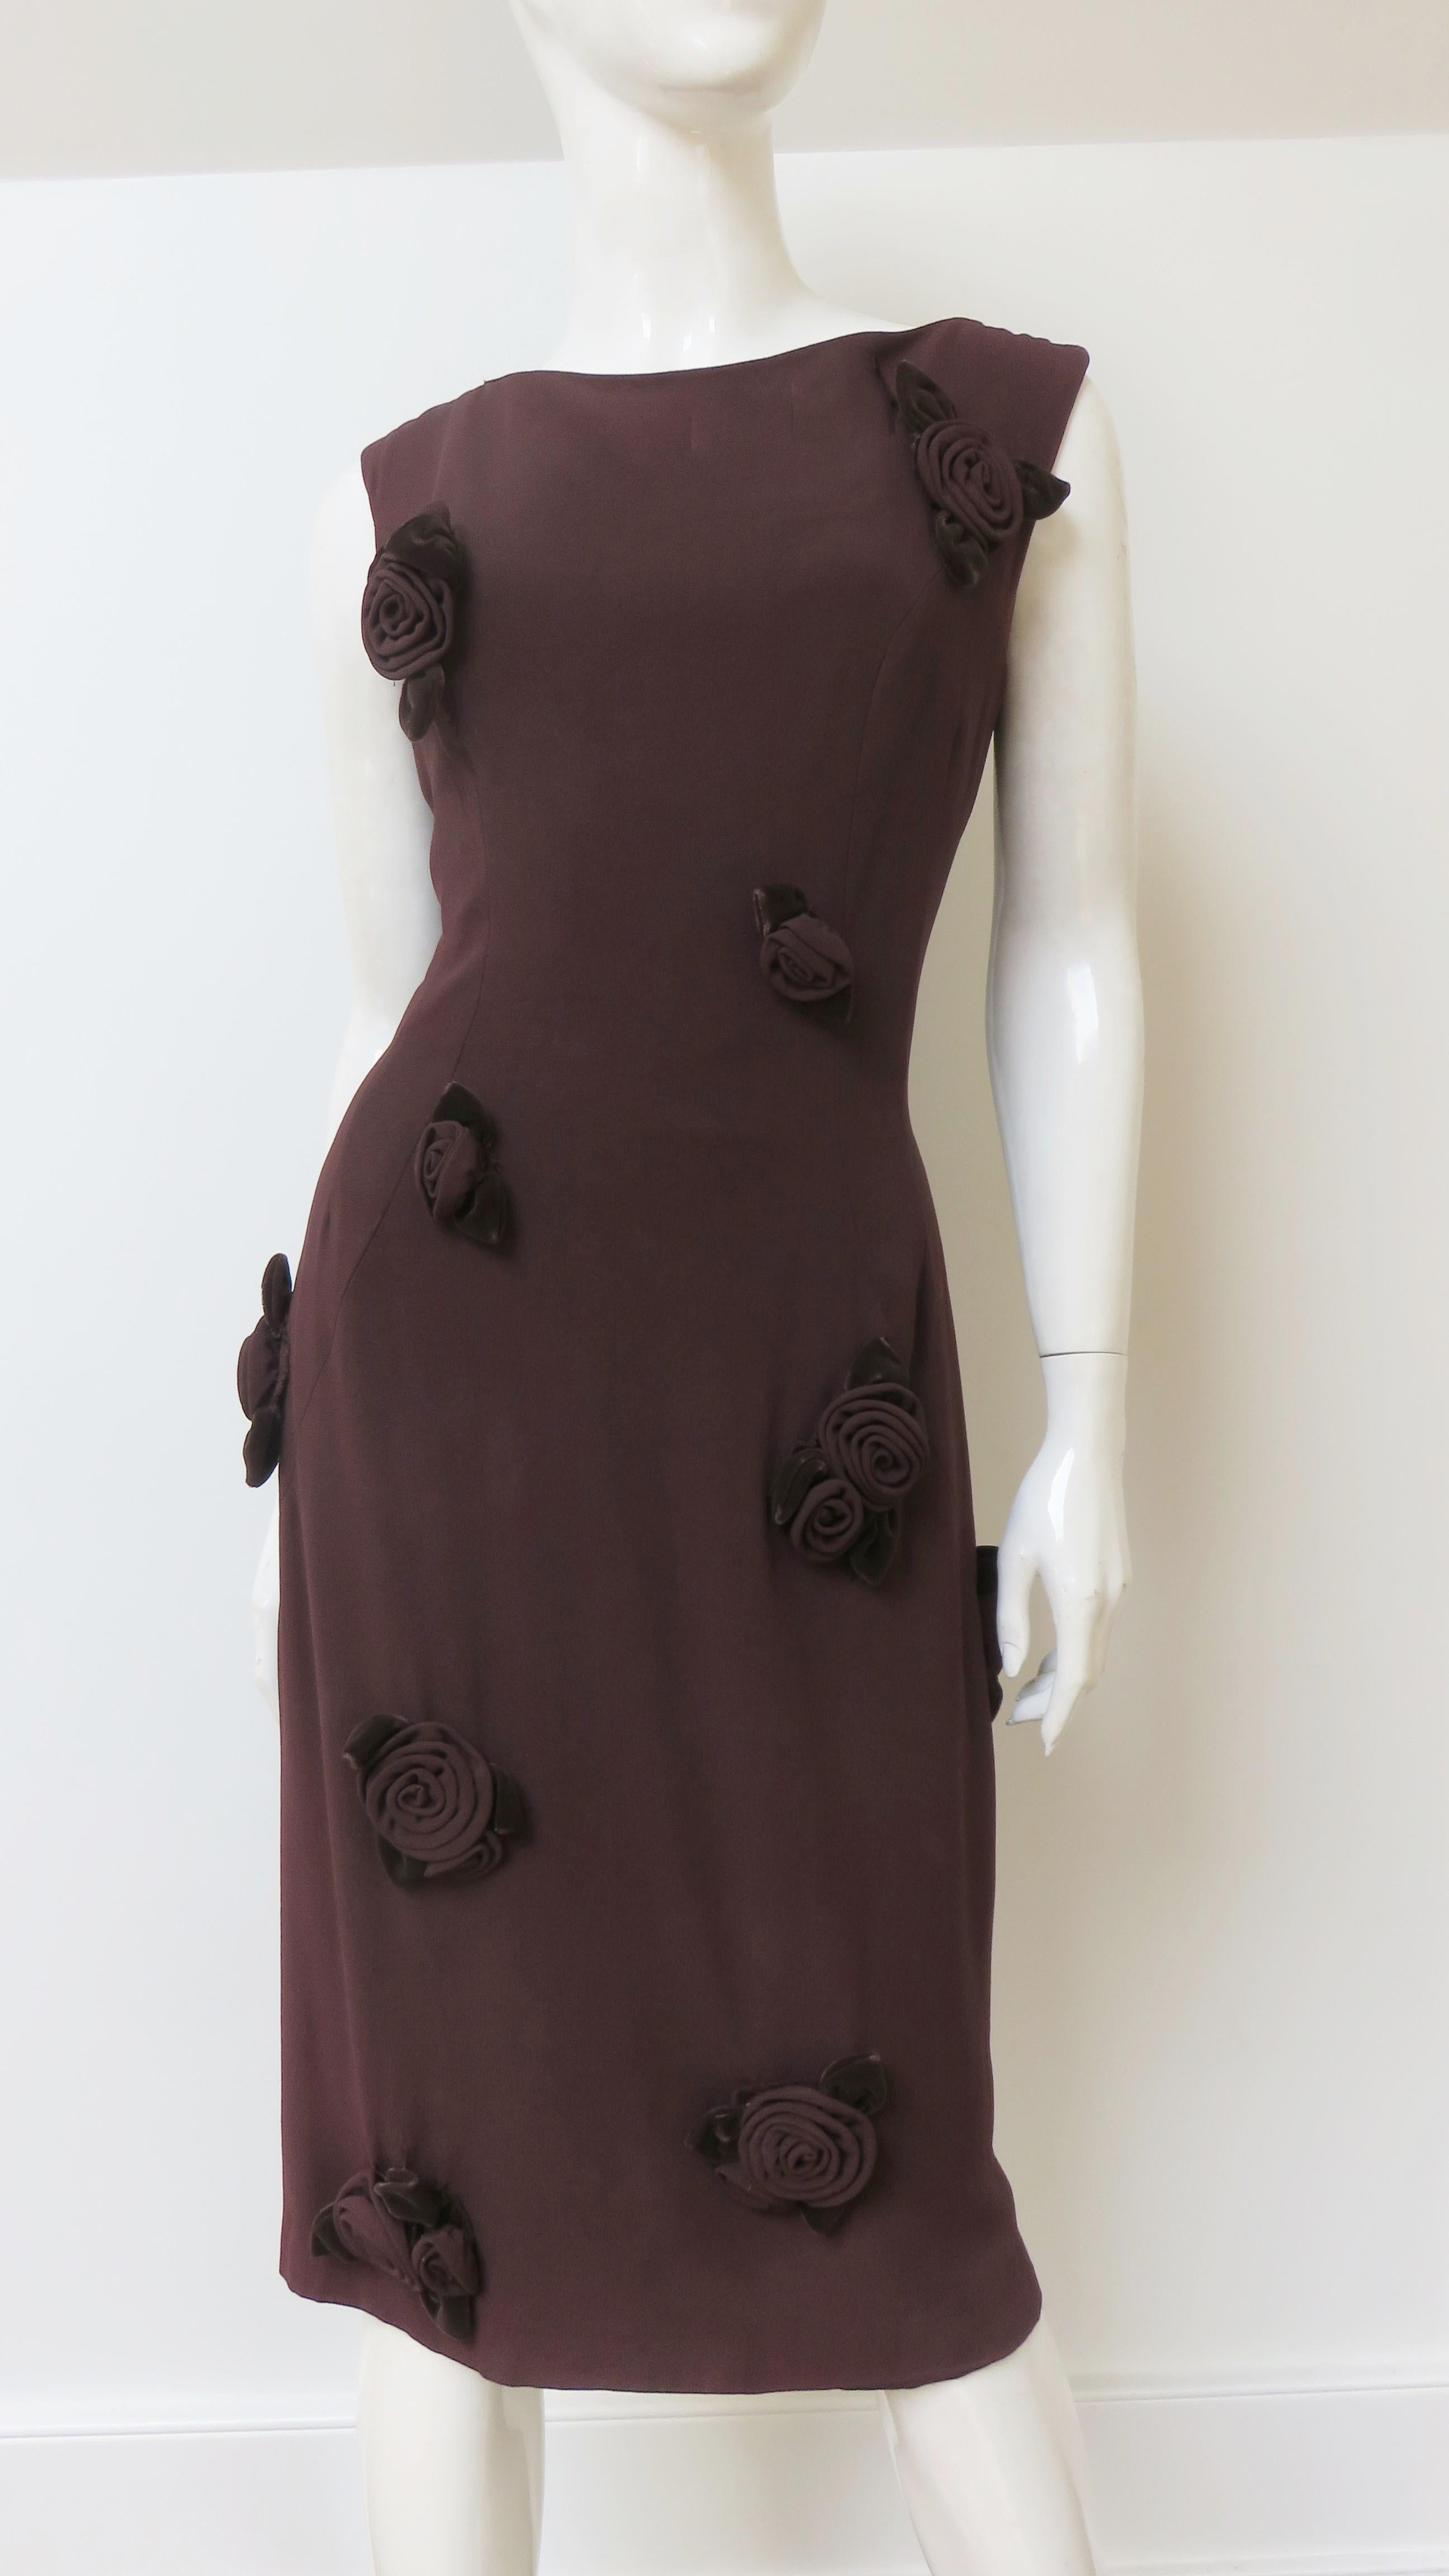 A fabulous chocolate brown dress by Louis Estevez covered in applique roses from Louis Estevez. It is semi fitted, sleeveless and covered in appliques of elaborately constructed roses comprised of matching fabric petals and velvet leaves. It is